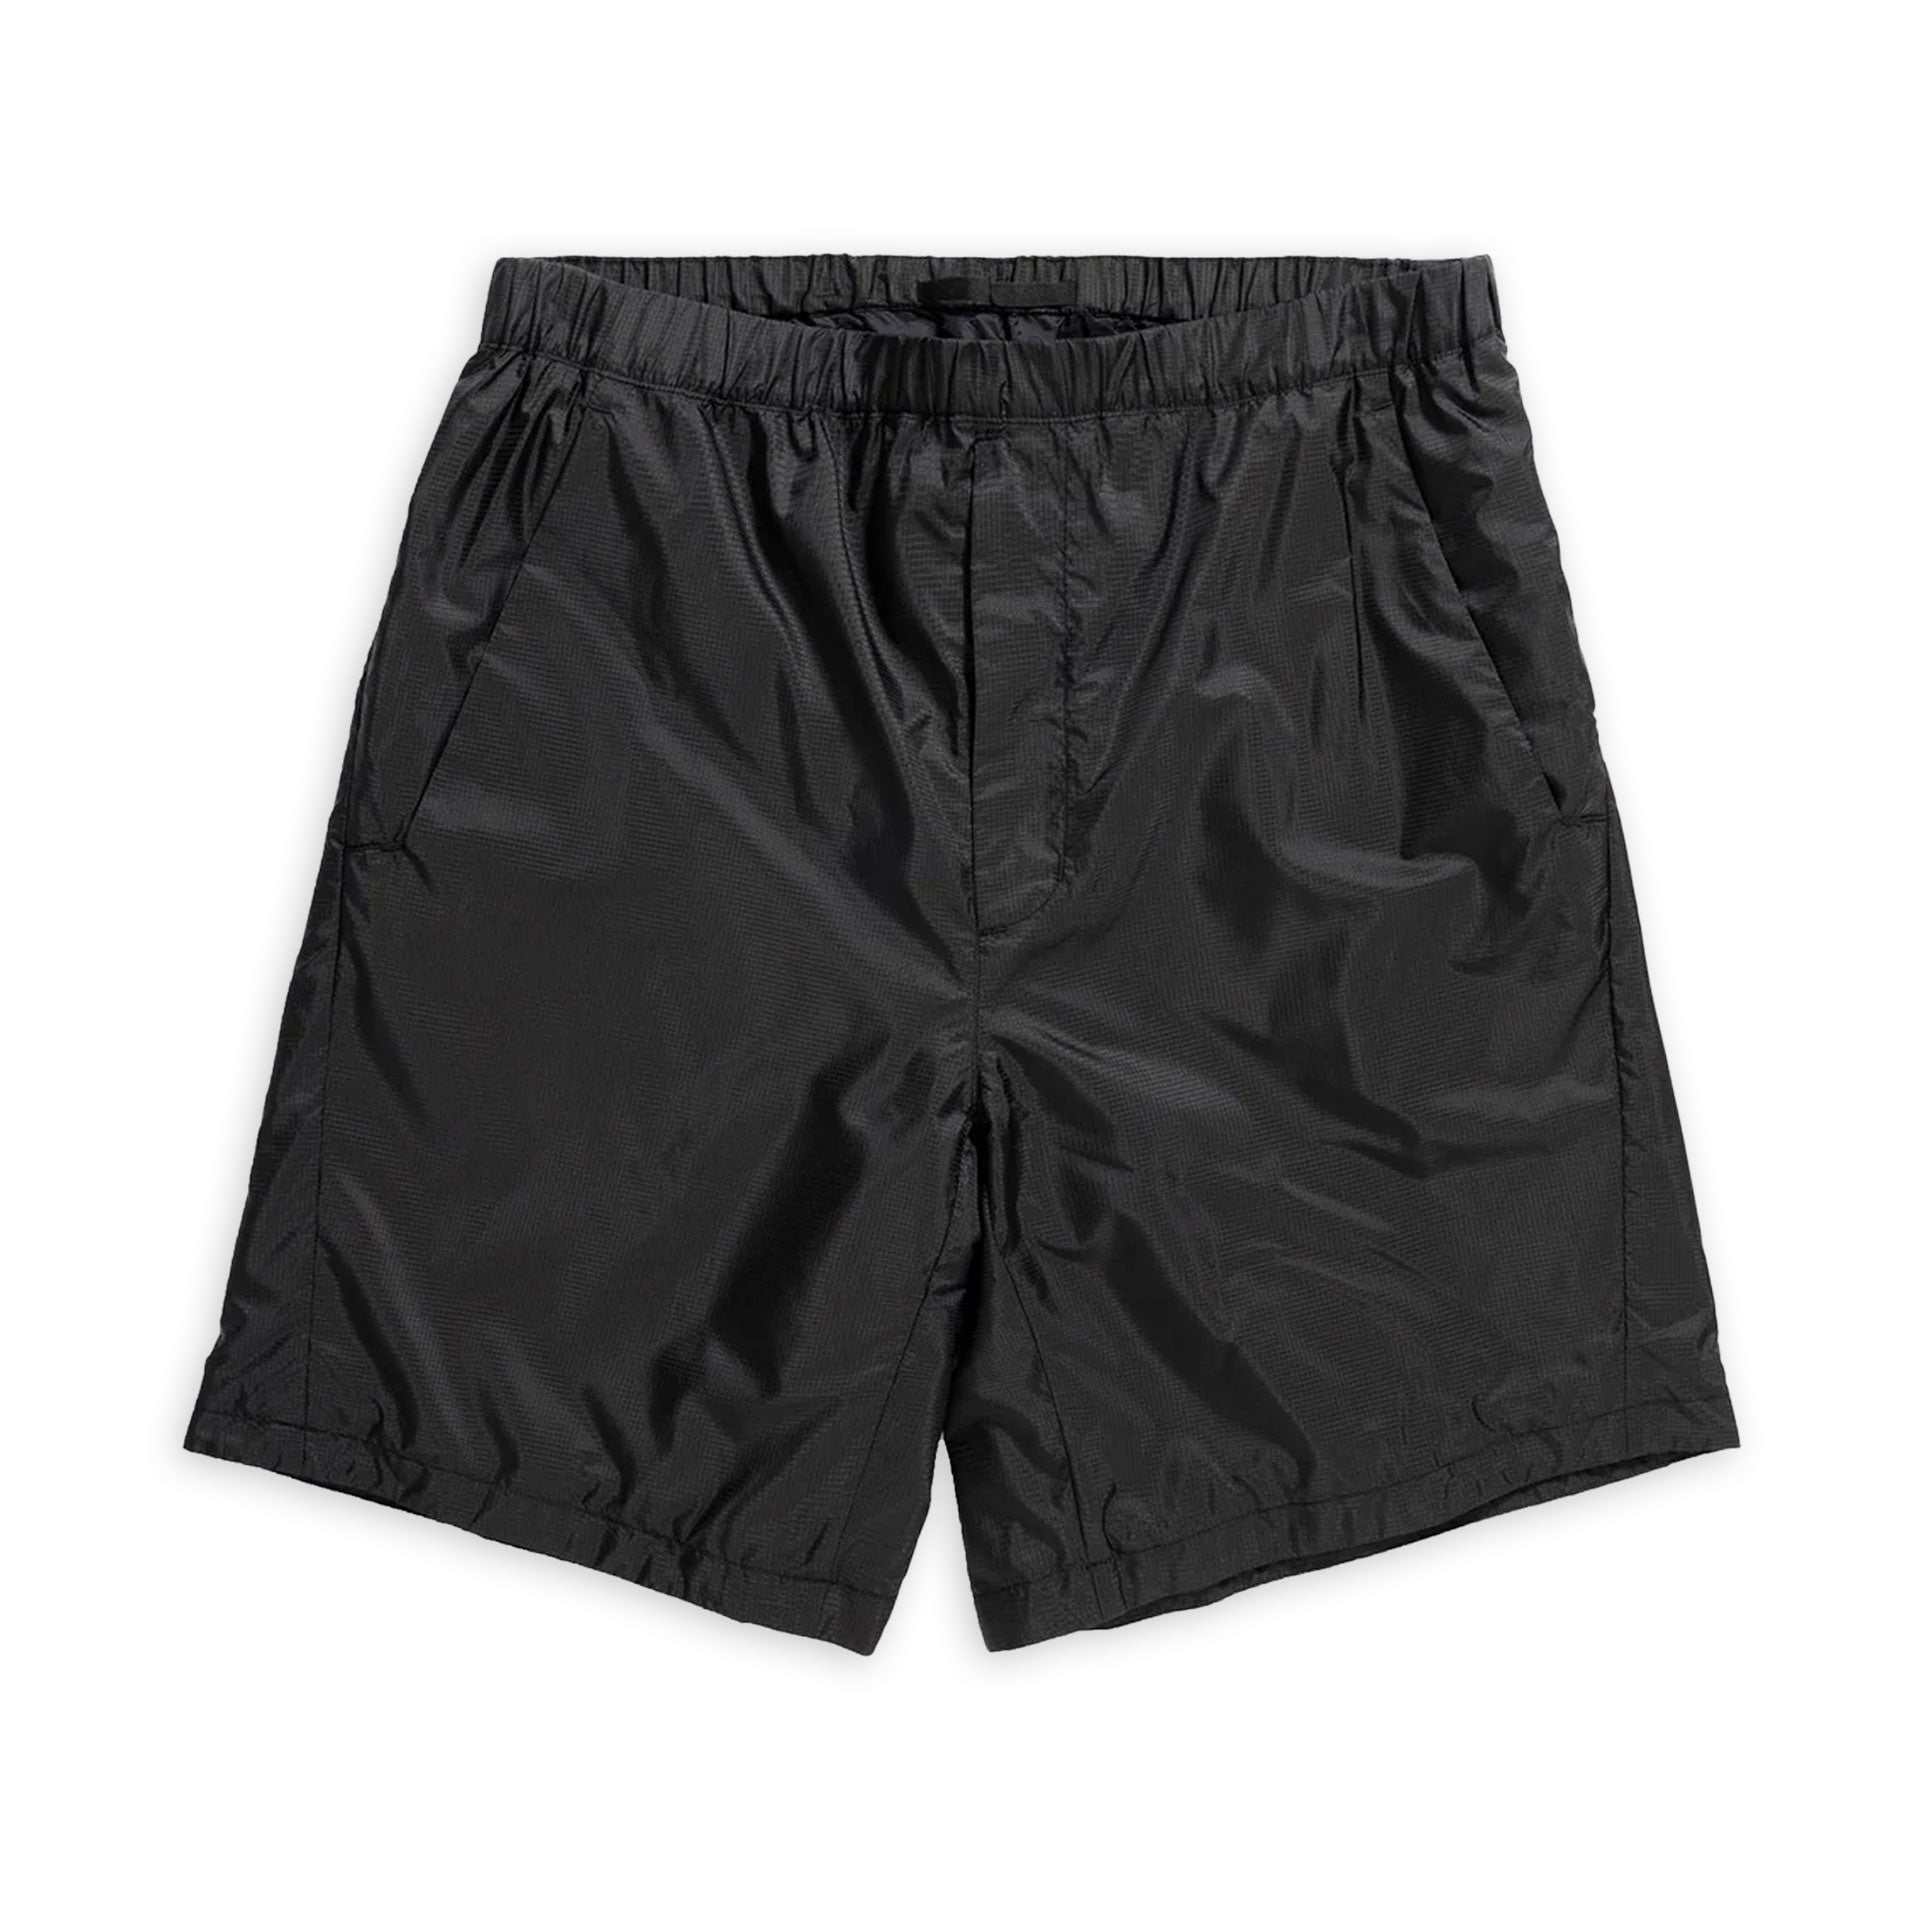 Norse Projects Pasmo Shorts | Uncrate Supply, #Norse #Projects #Pasmo #Shorts #Uncrate #Supply